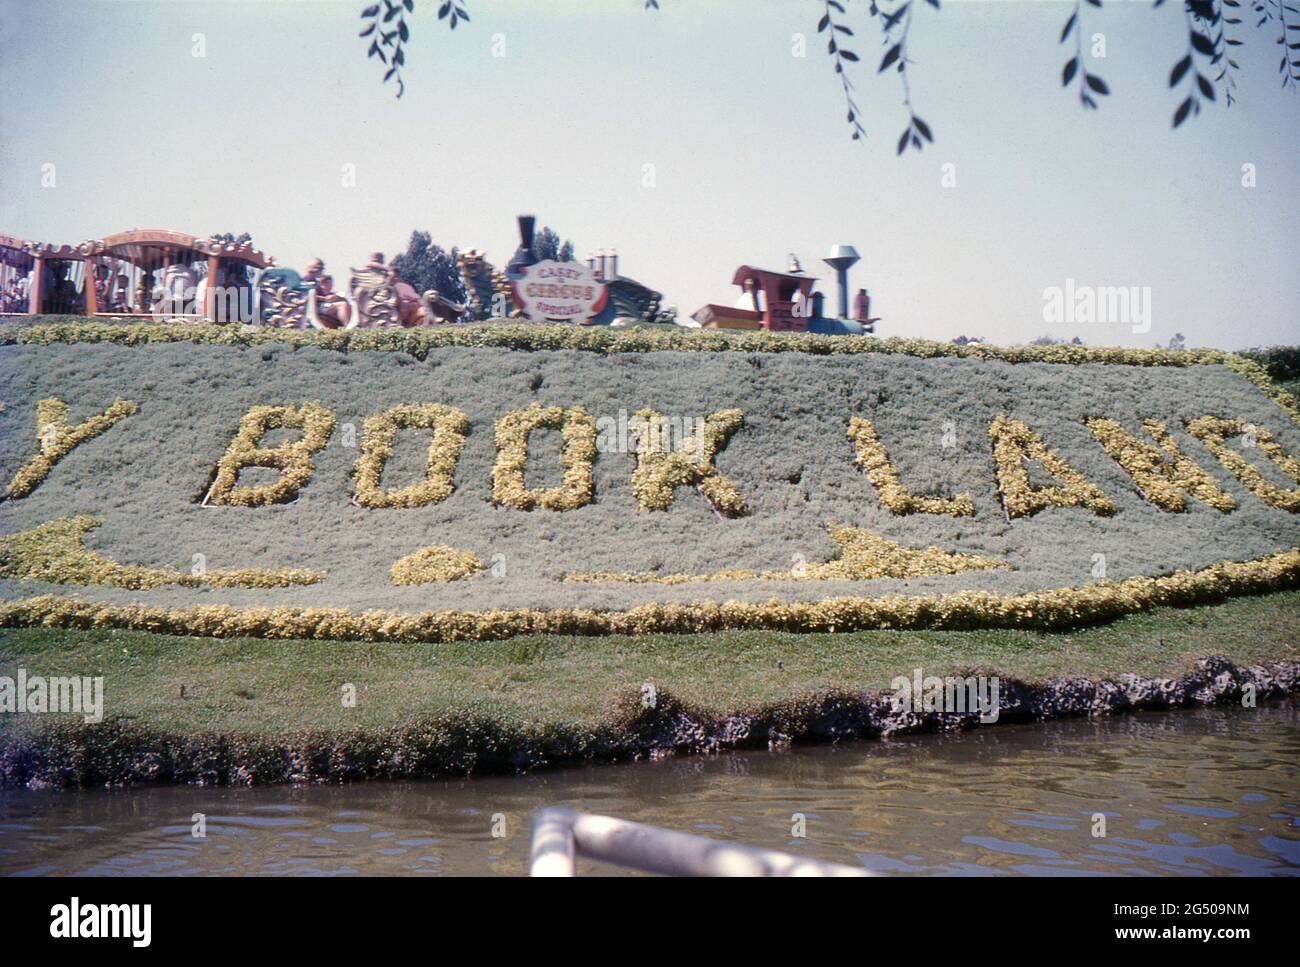 Disneyland, California, 1959. A view of the Casey Jr. Circus Train passing the Storybook Land mural and canal. Stock Photo